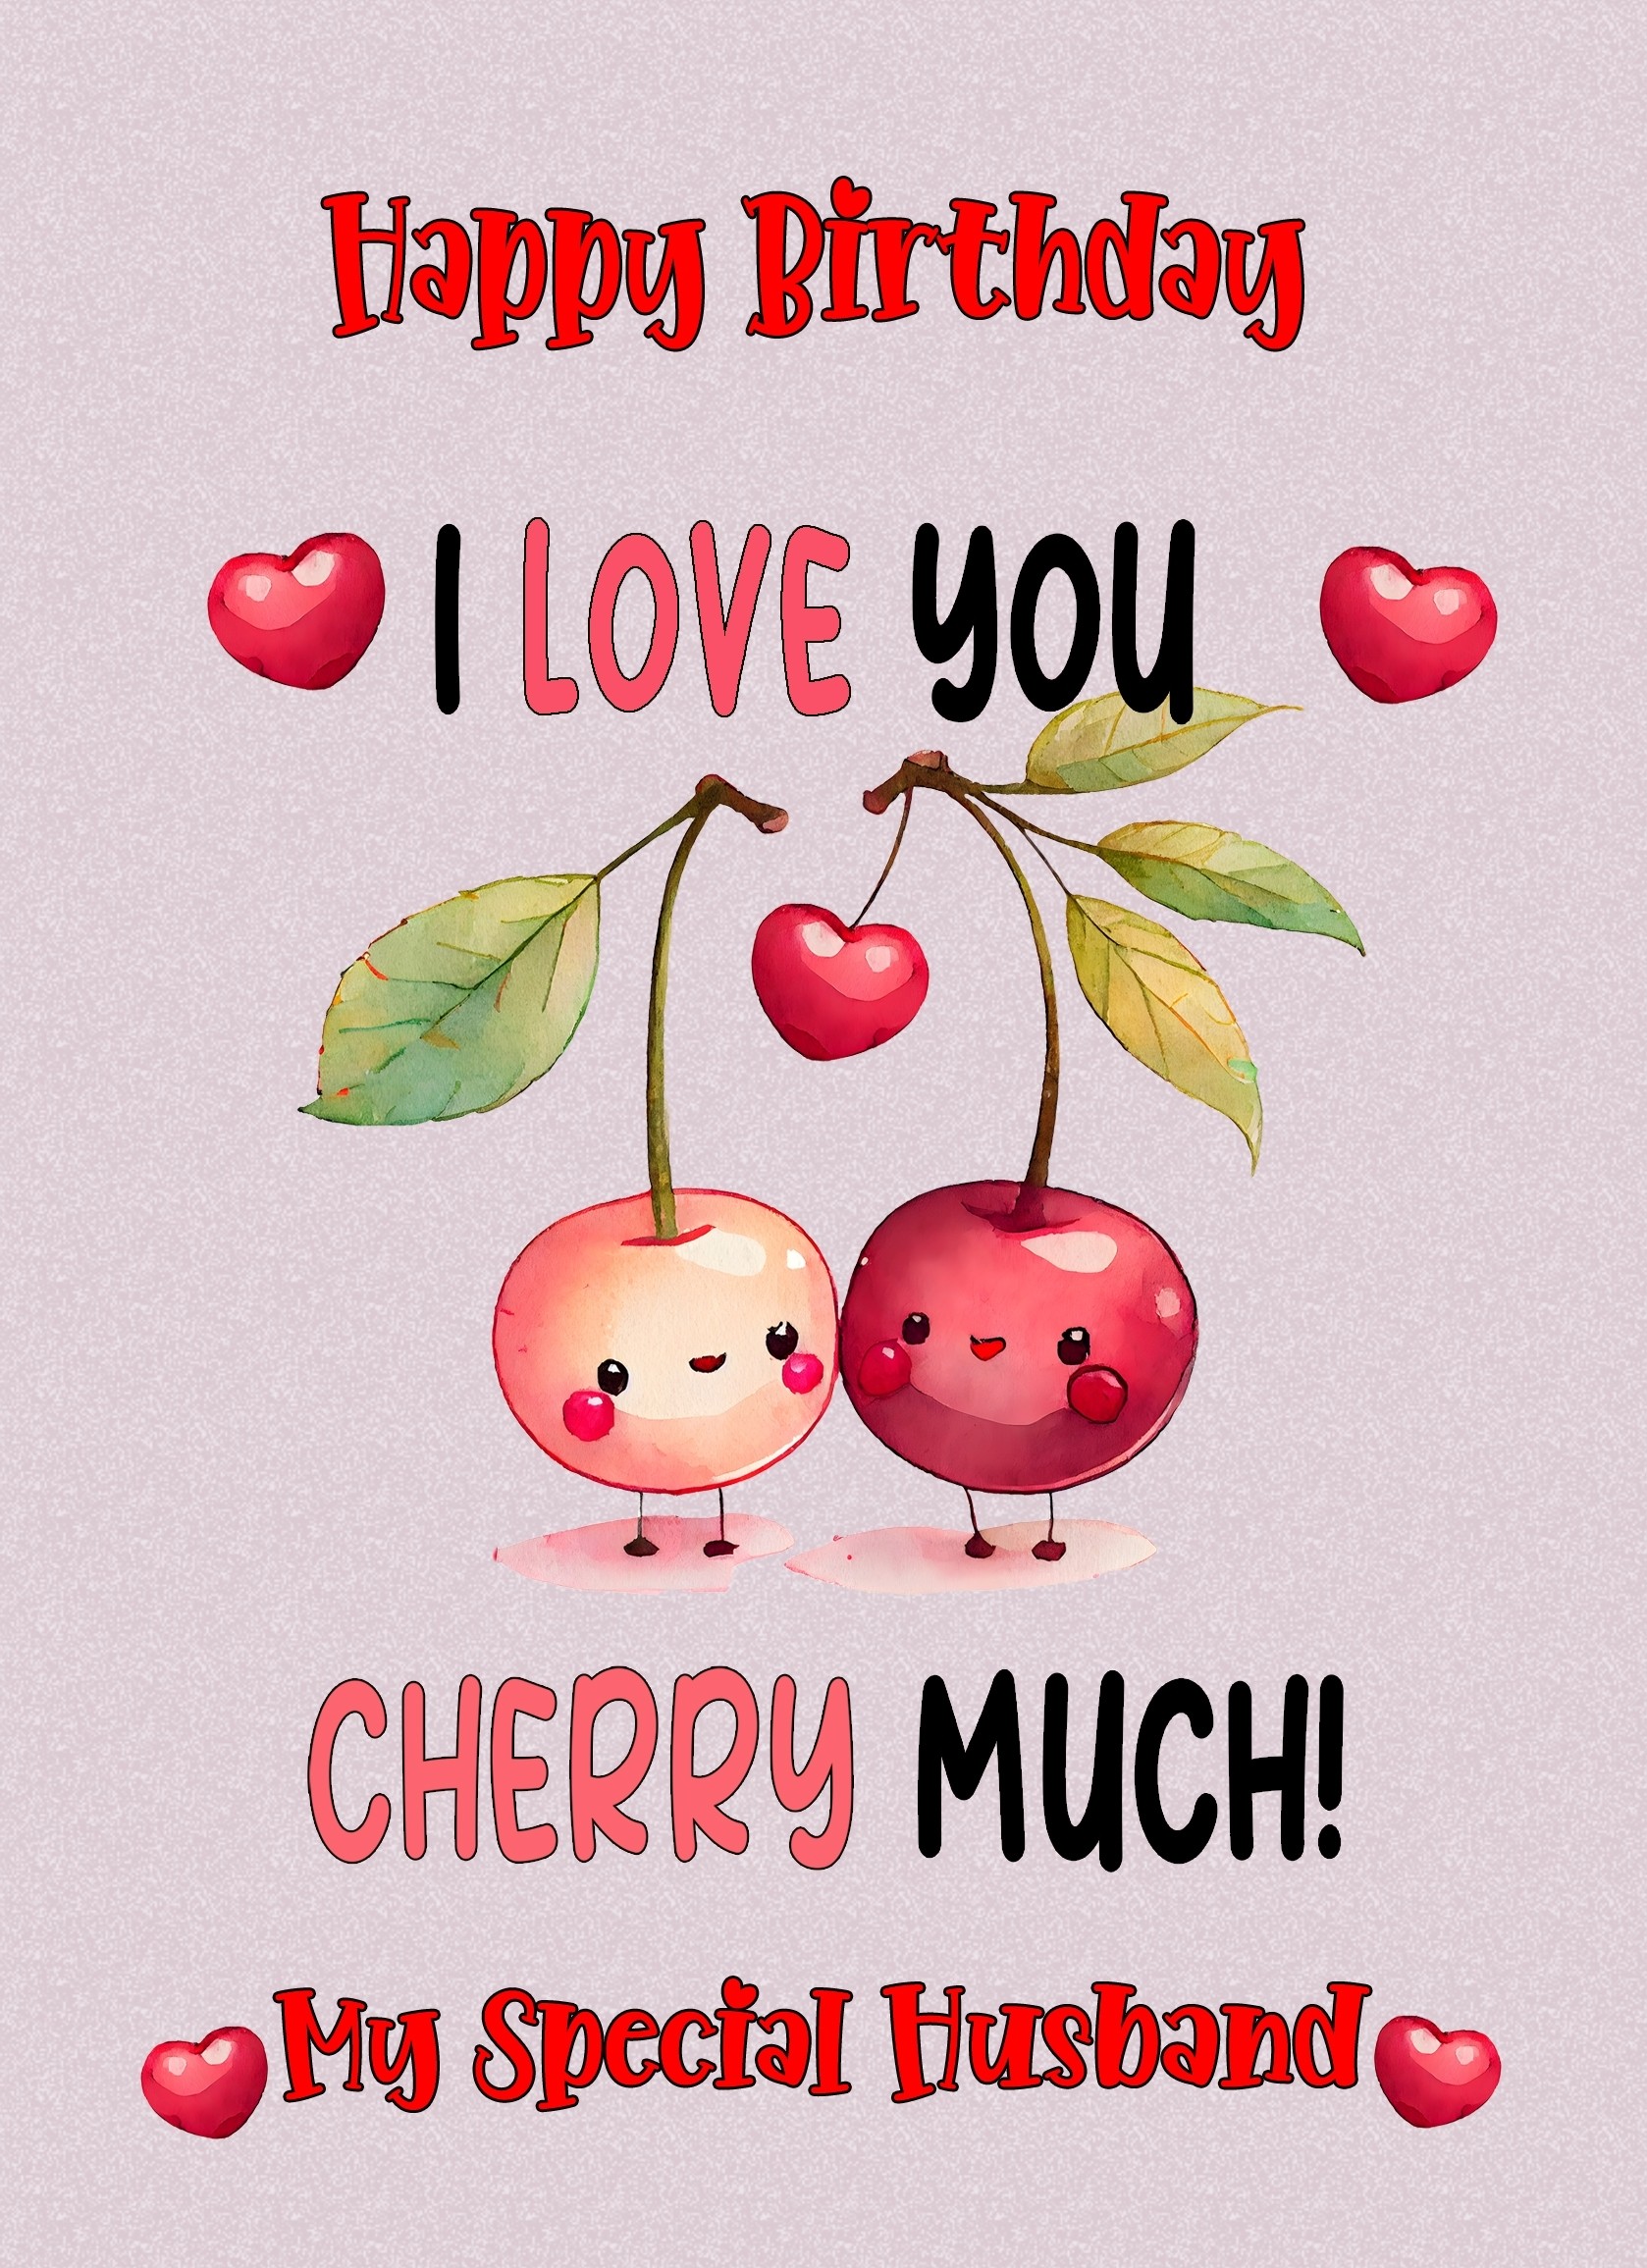 Funny Pun Romantic Birthday Card for Husband (Cherry Much)